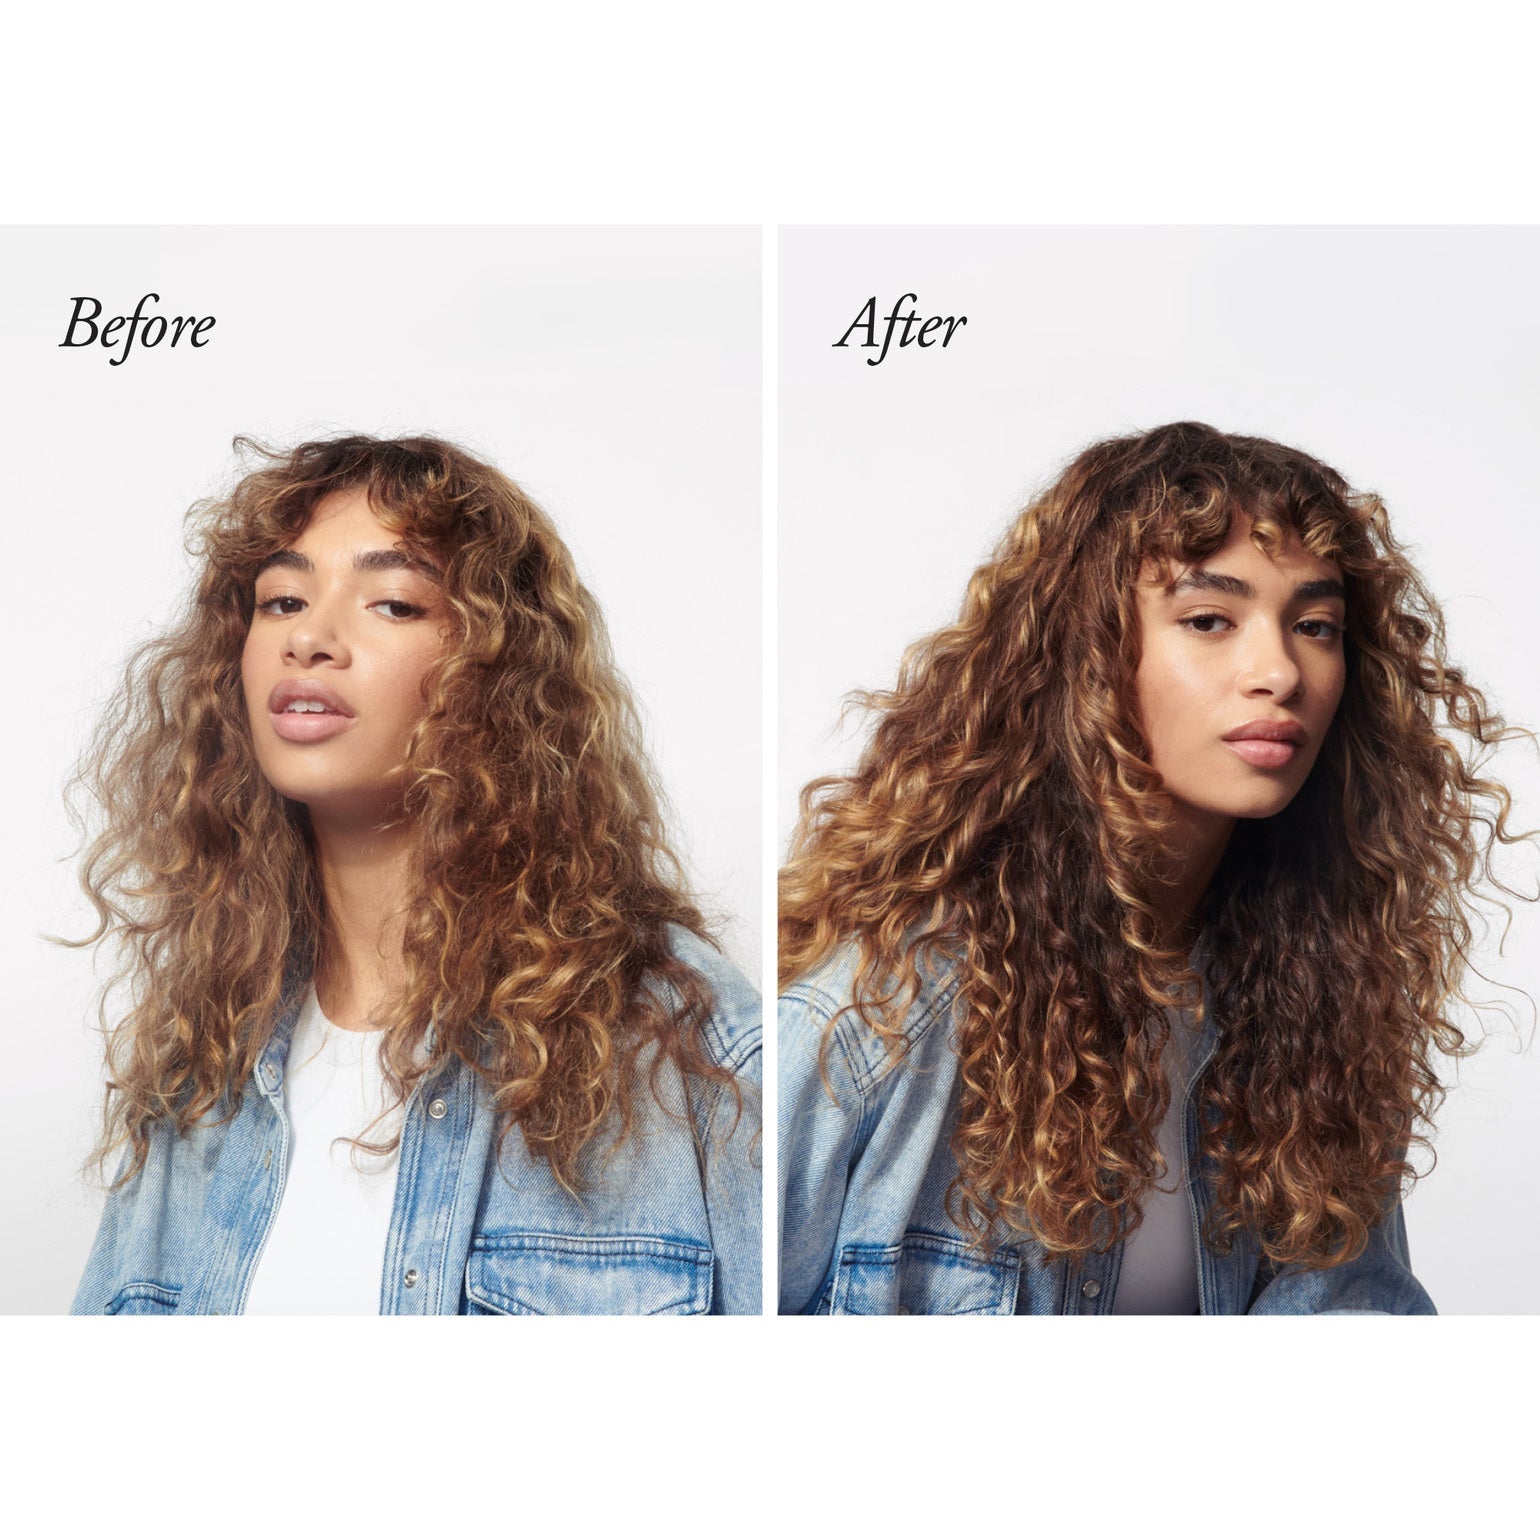 Curl Gloss Hydration & Hold